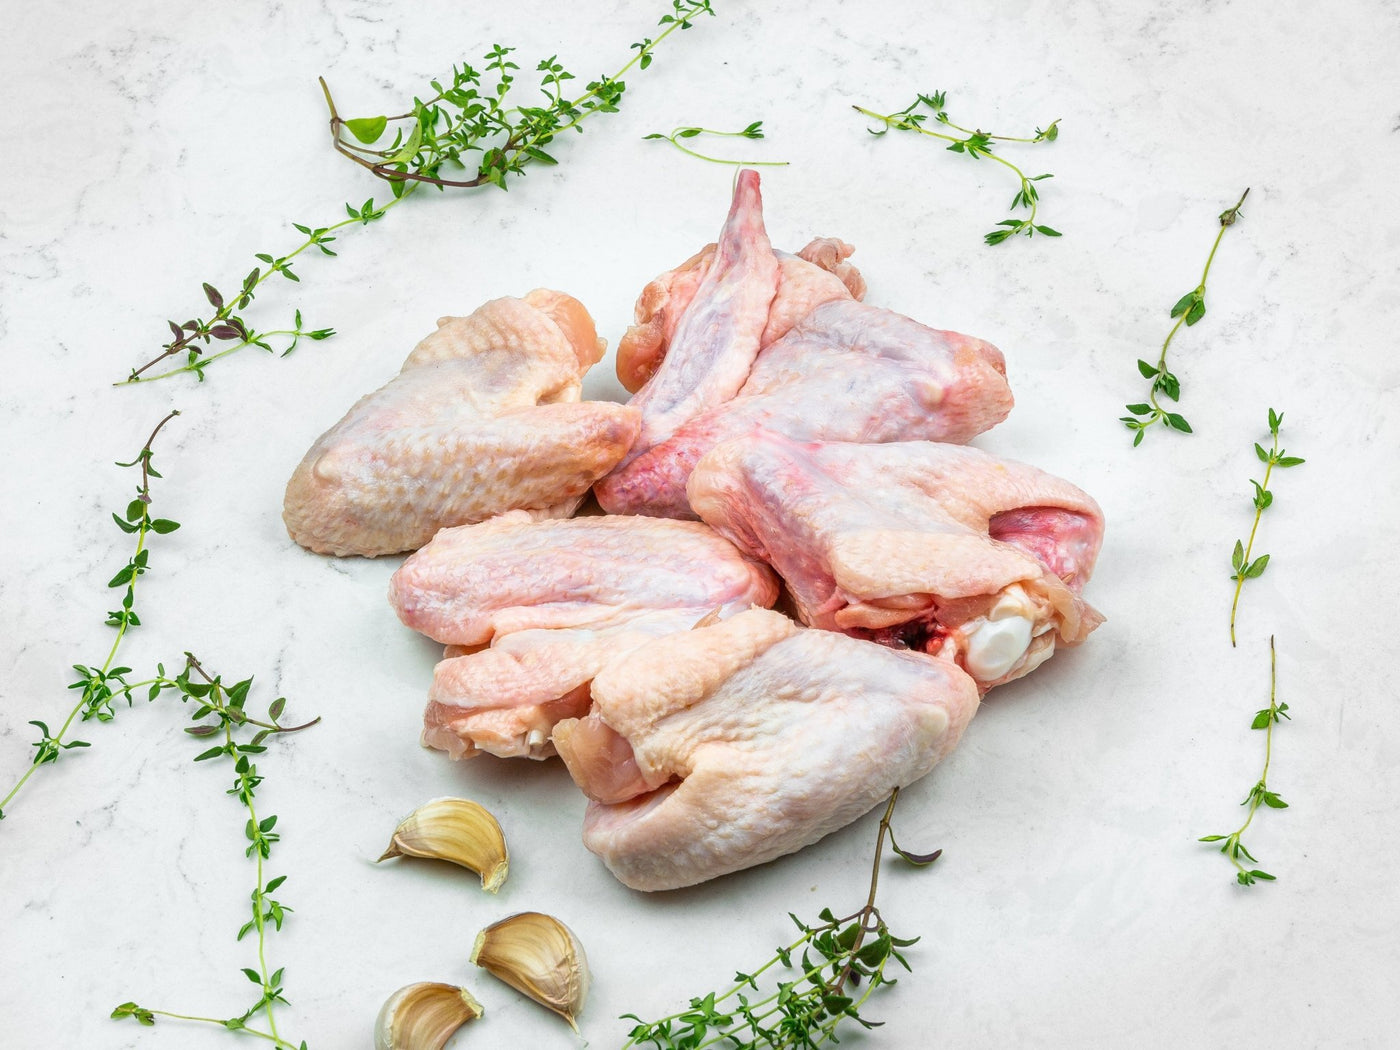 Free Range Herb Fed Chicken Wings - Chicken - Thomas Joseph Butchery - Ethical Dry-Aged Meat The Best Steak UK Thomas Joseph Butchery